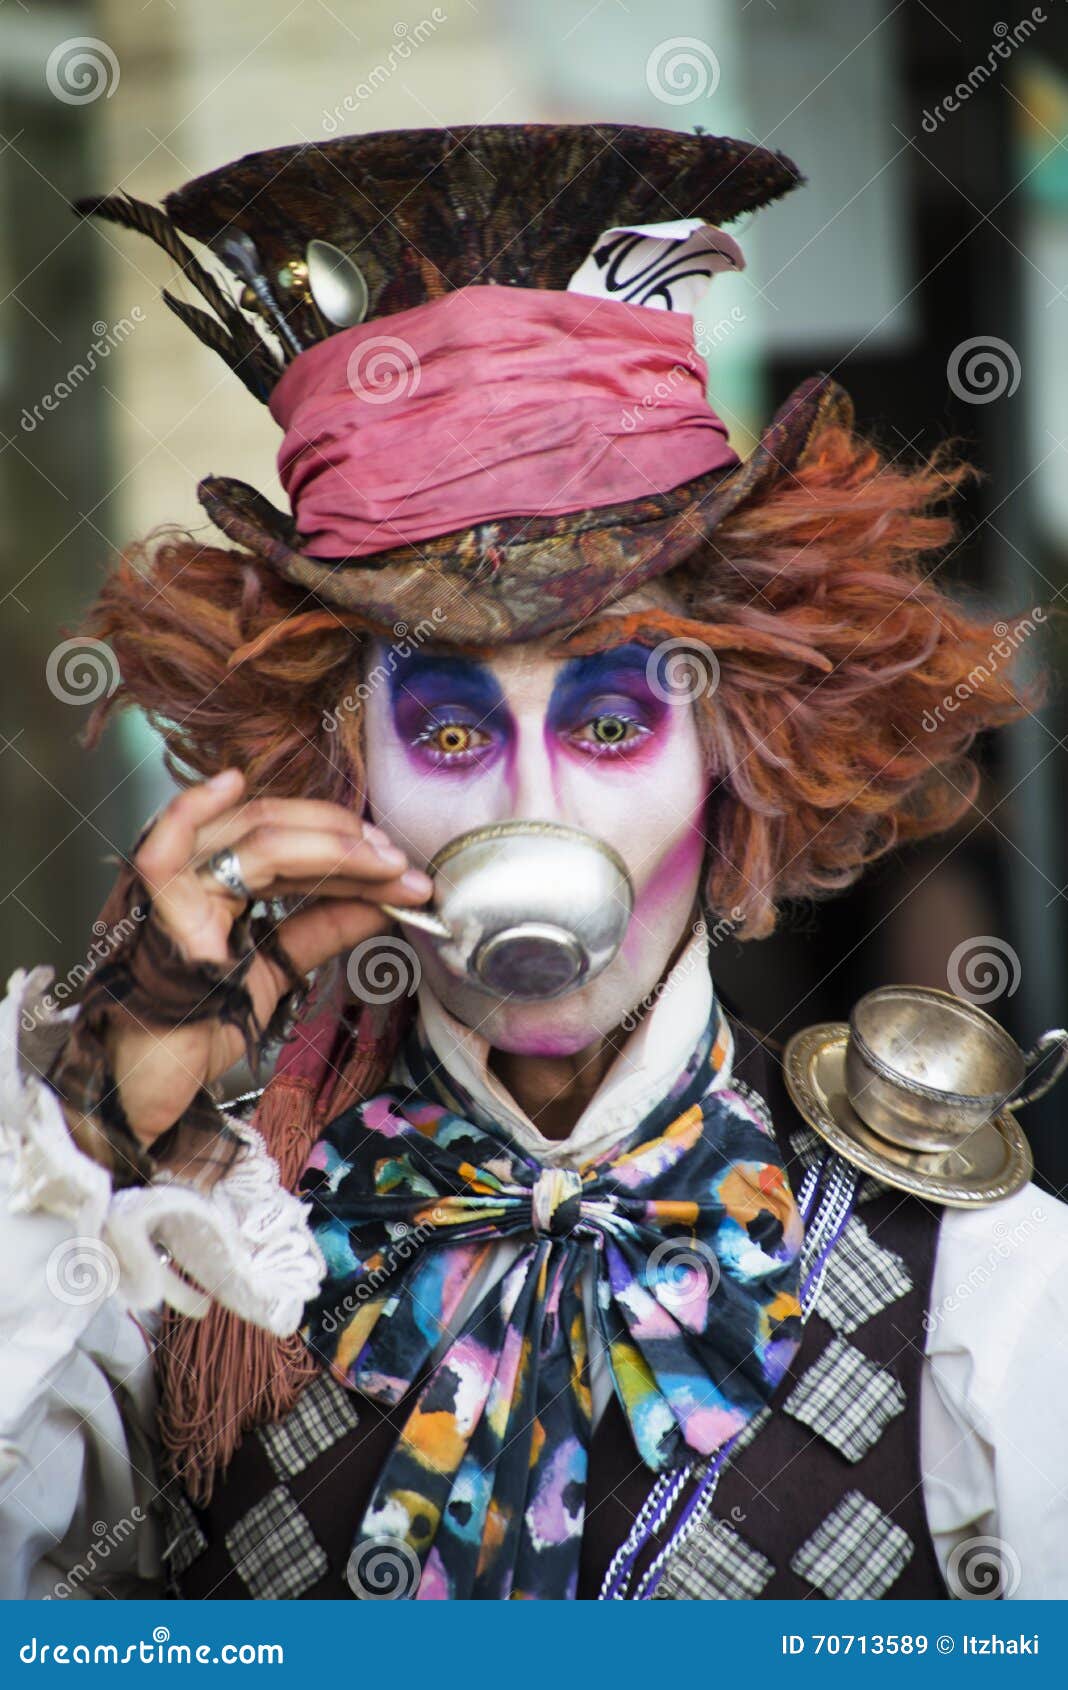 Mad Hatter editorial stock image. Image of halloween - 70713589